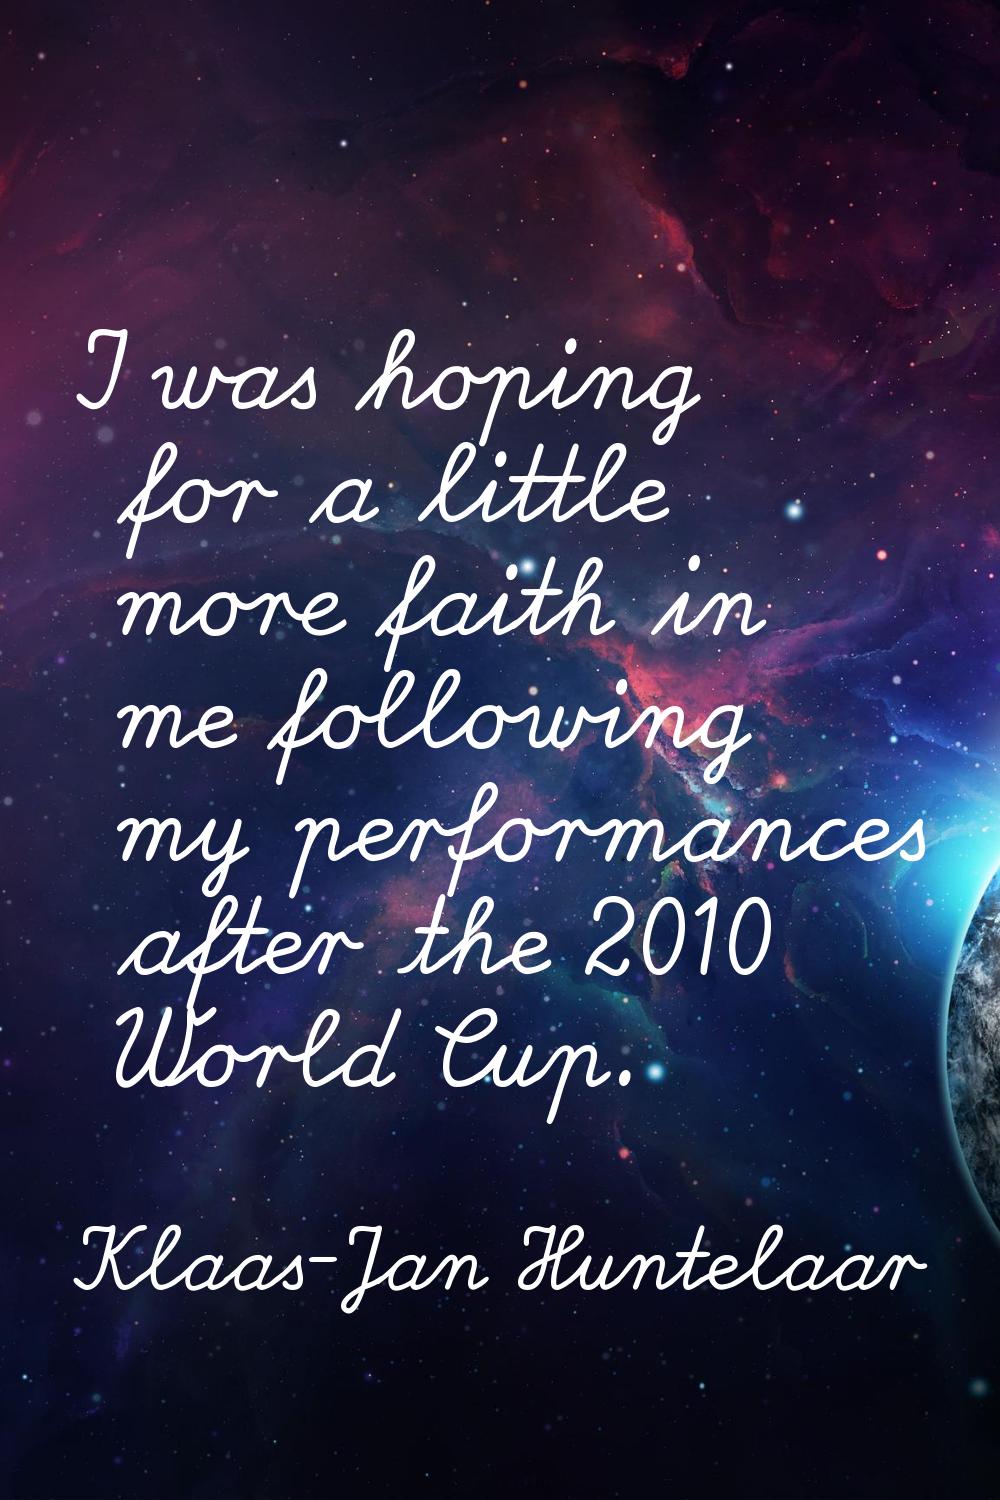 I was hoping for a little more faith in me following my performances after the 2010 World Cup.